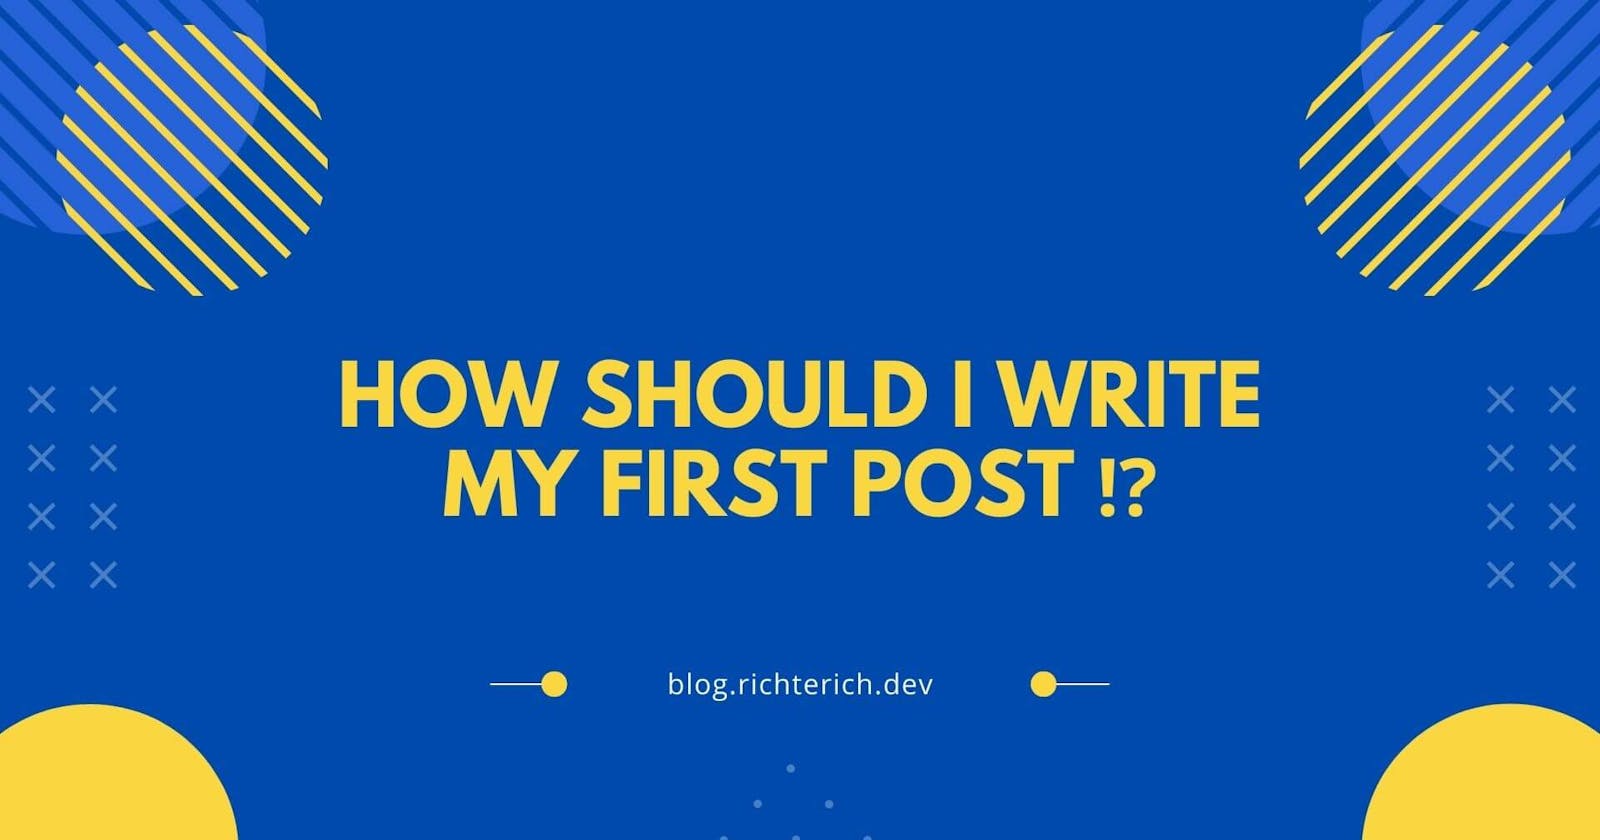 How should I write my first post ⁉